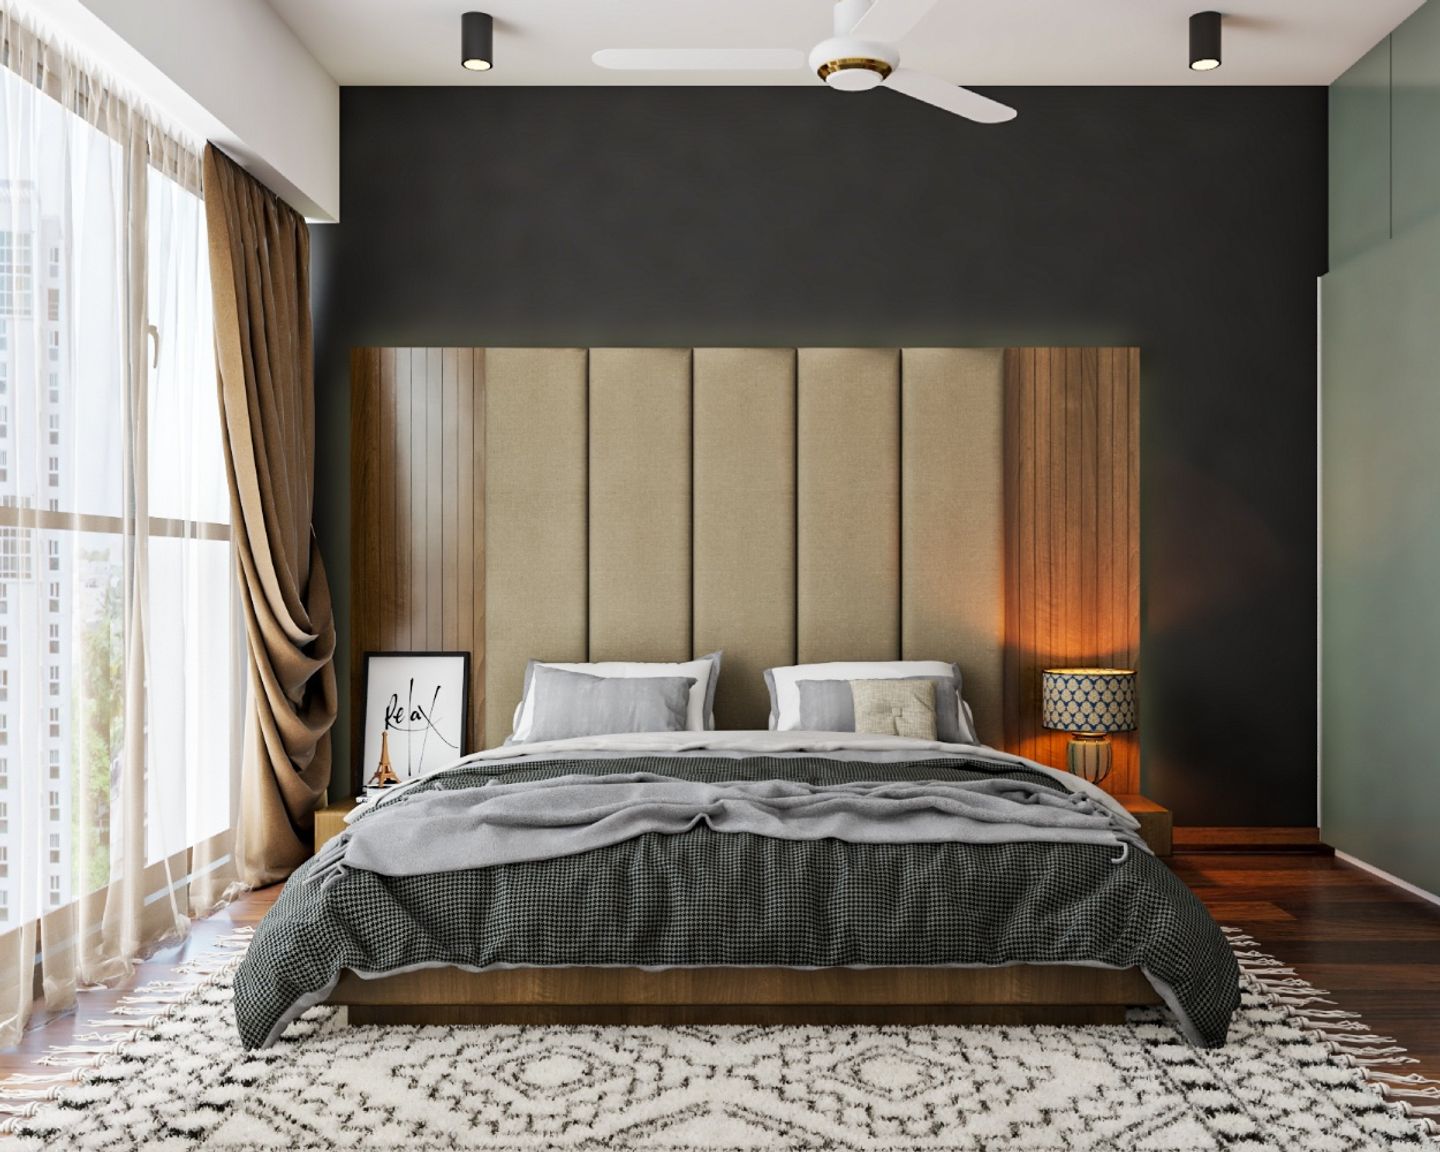 Wall Design With Panelling Ang Wallpaper - Livspace